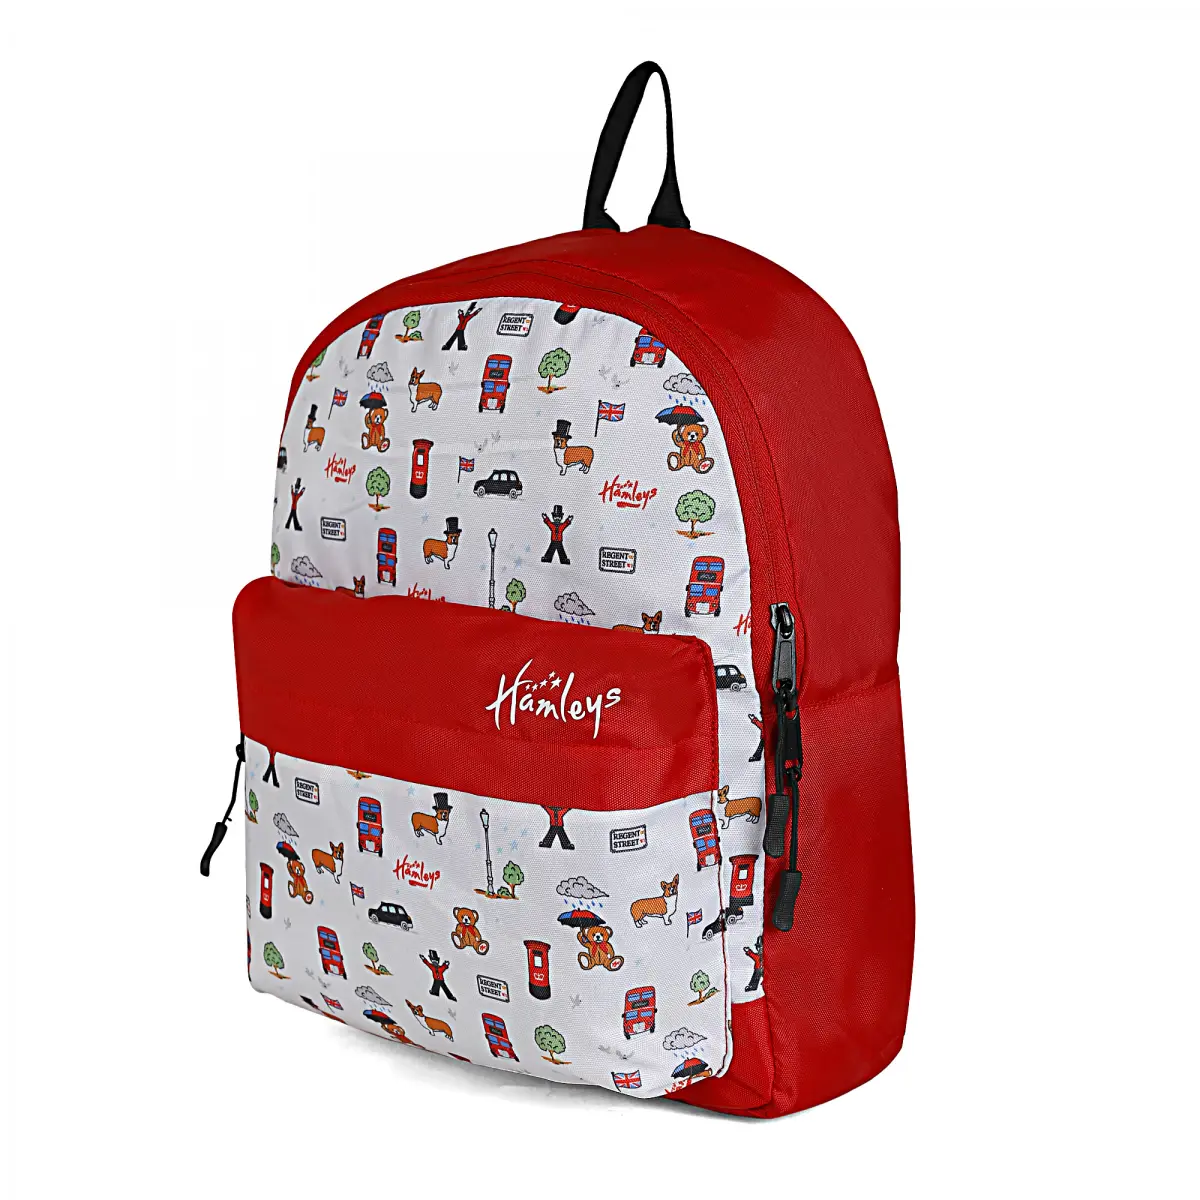 Hamleys School Bag Pack for Kids, 14Inches, Red, 12Y+